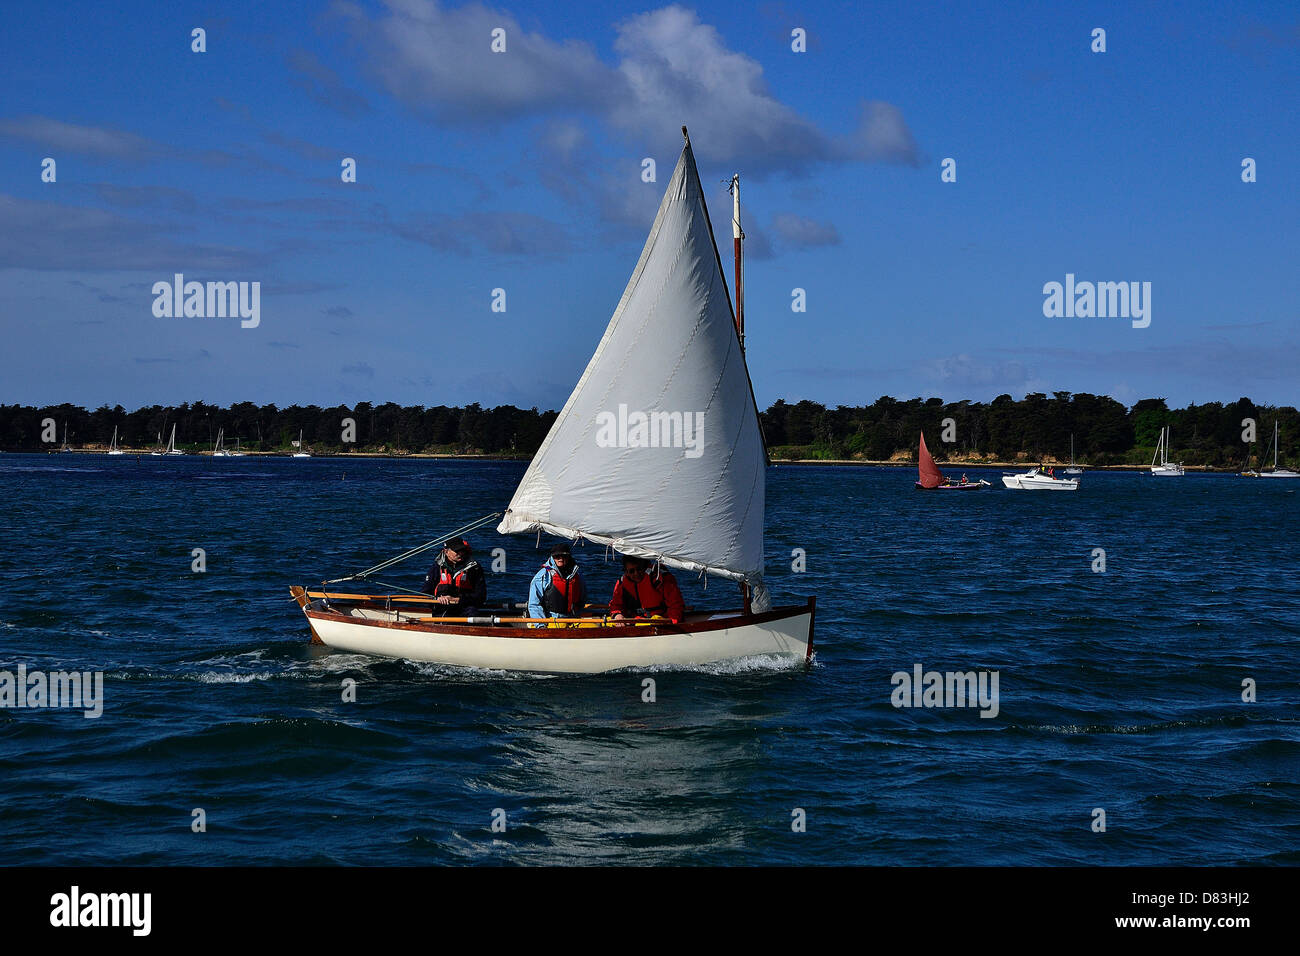 Small sailing boat, sail and oar boat sailing in Morbihan gulf, during maritime event 'Semaine du golfe'. Stock Photo